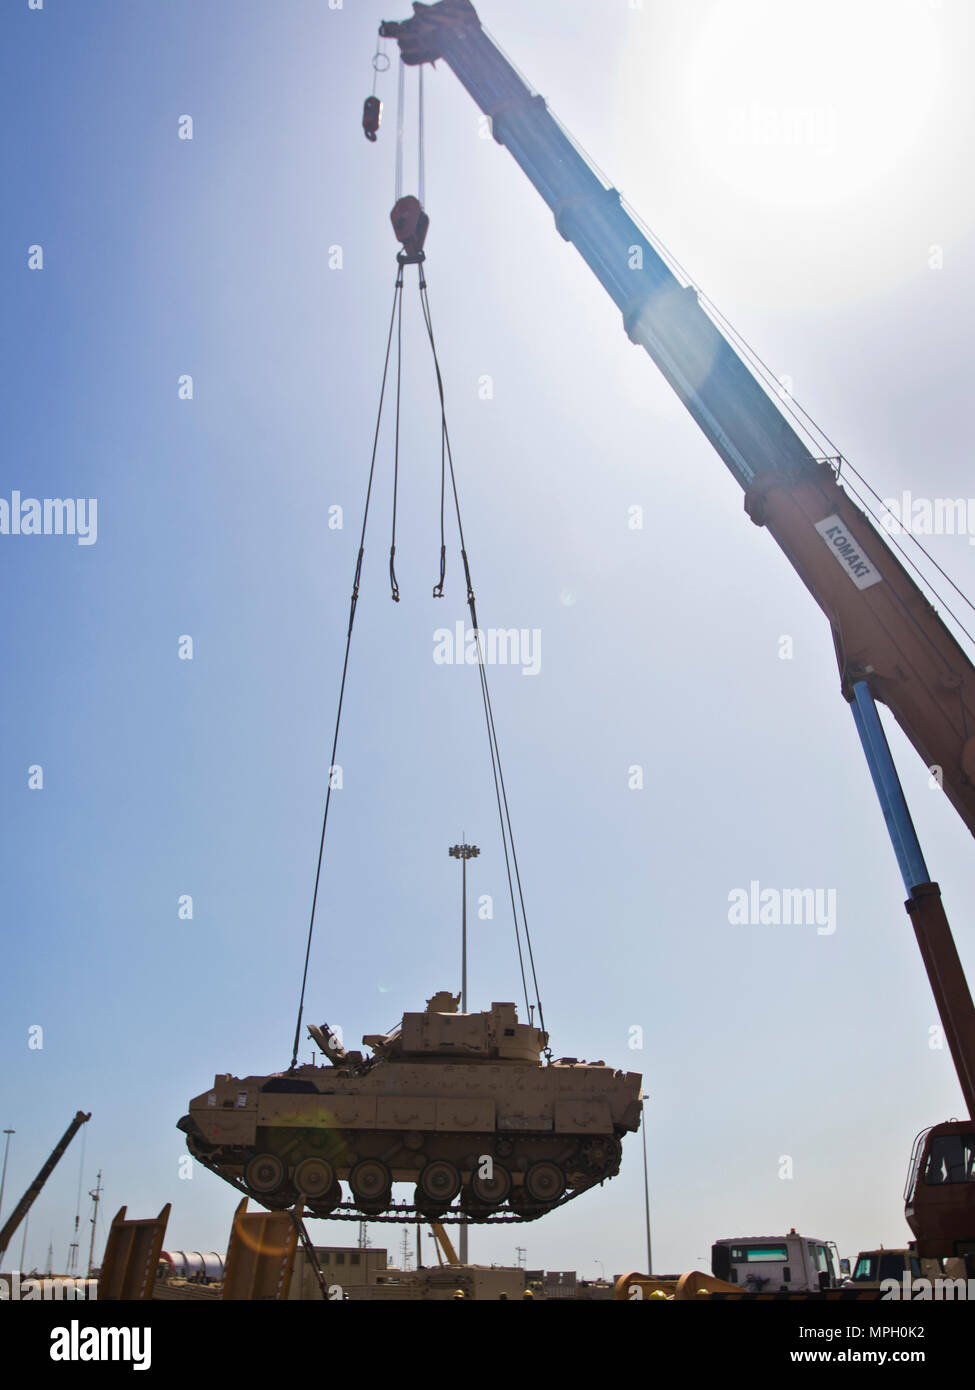 A M2/M3 Bradley Fighting Vehicle is transported via crane onto a flat bed truck to be put on the USNS Mendonca at Shuaiba Port, Kuwait, on Feb. 28, 2017. The Mendonca is used to import and export U.S. Military vehicles in support of operations in the USCENTCOM AOR. (U.S. Army Photo by Staff Sgt. Dalton Smith) Stock Photo